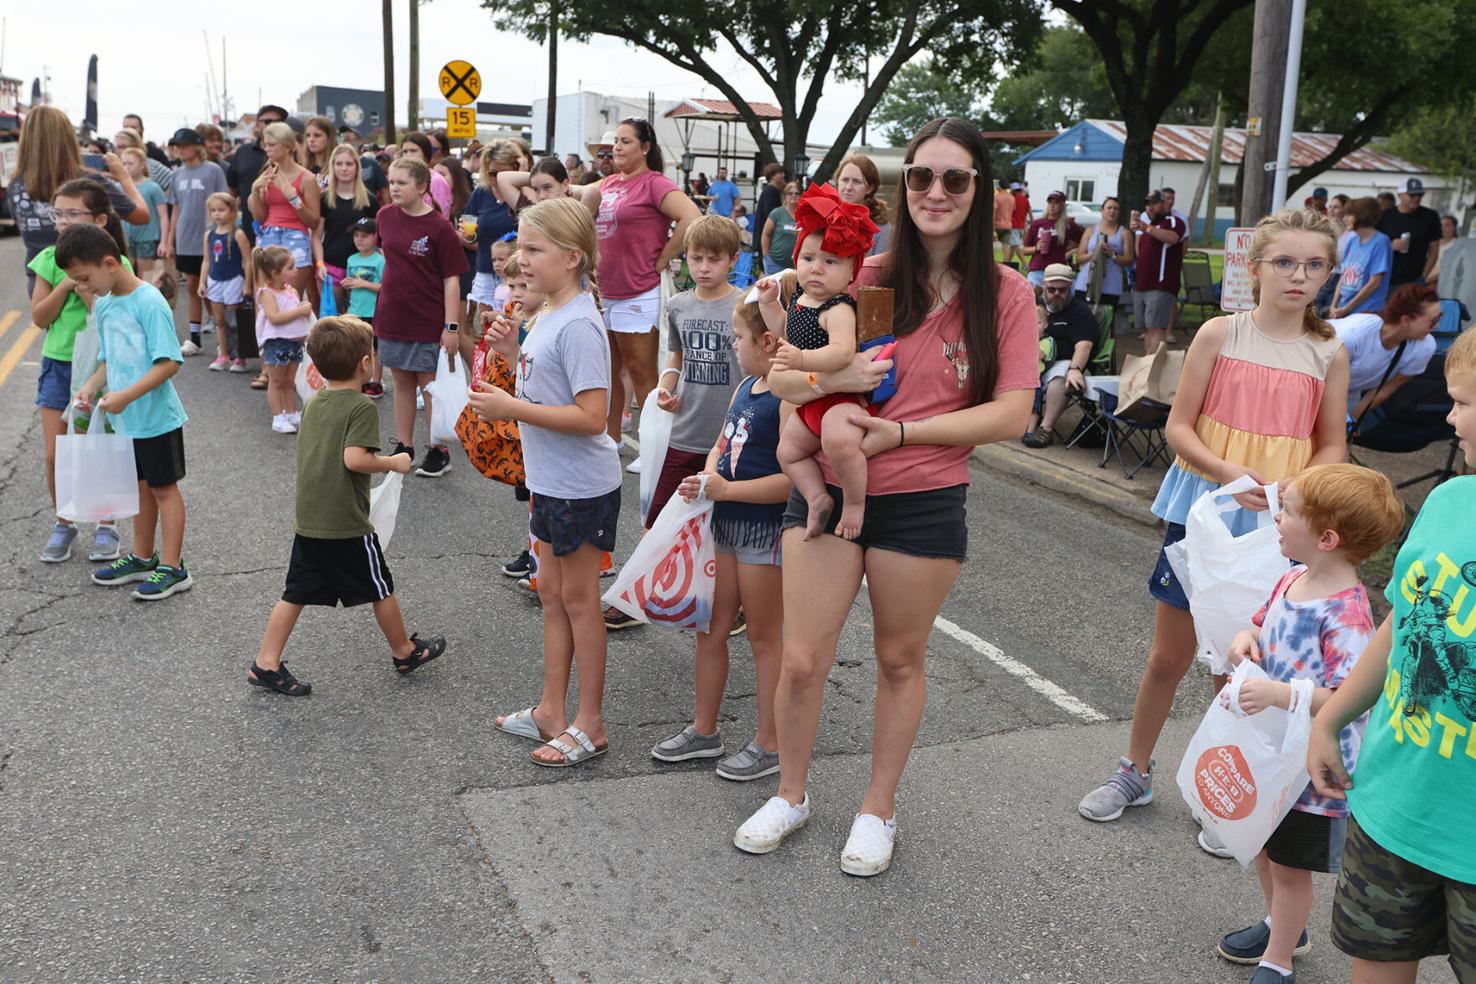 PHOTOS — Westfest 2022 Tradition continues at 46th annual event